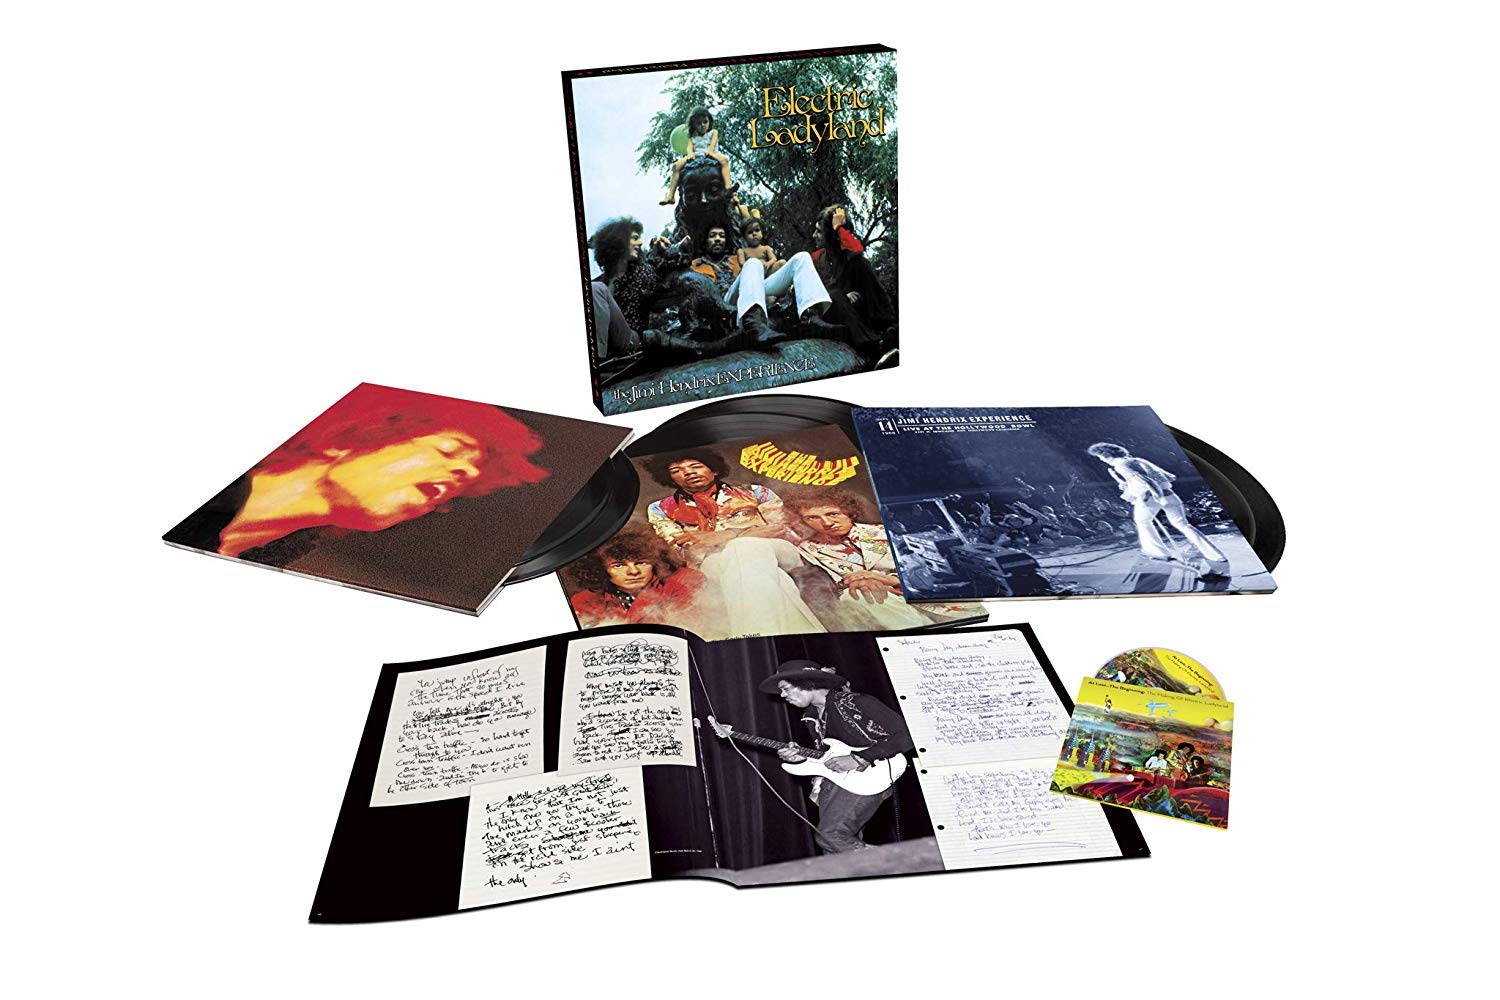 Electric Ladyland - 50Th Anniversary - Vinyl + Blu-Ray Disc | The Jimi Hendrix Experience